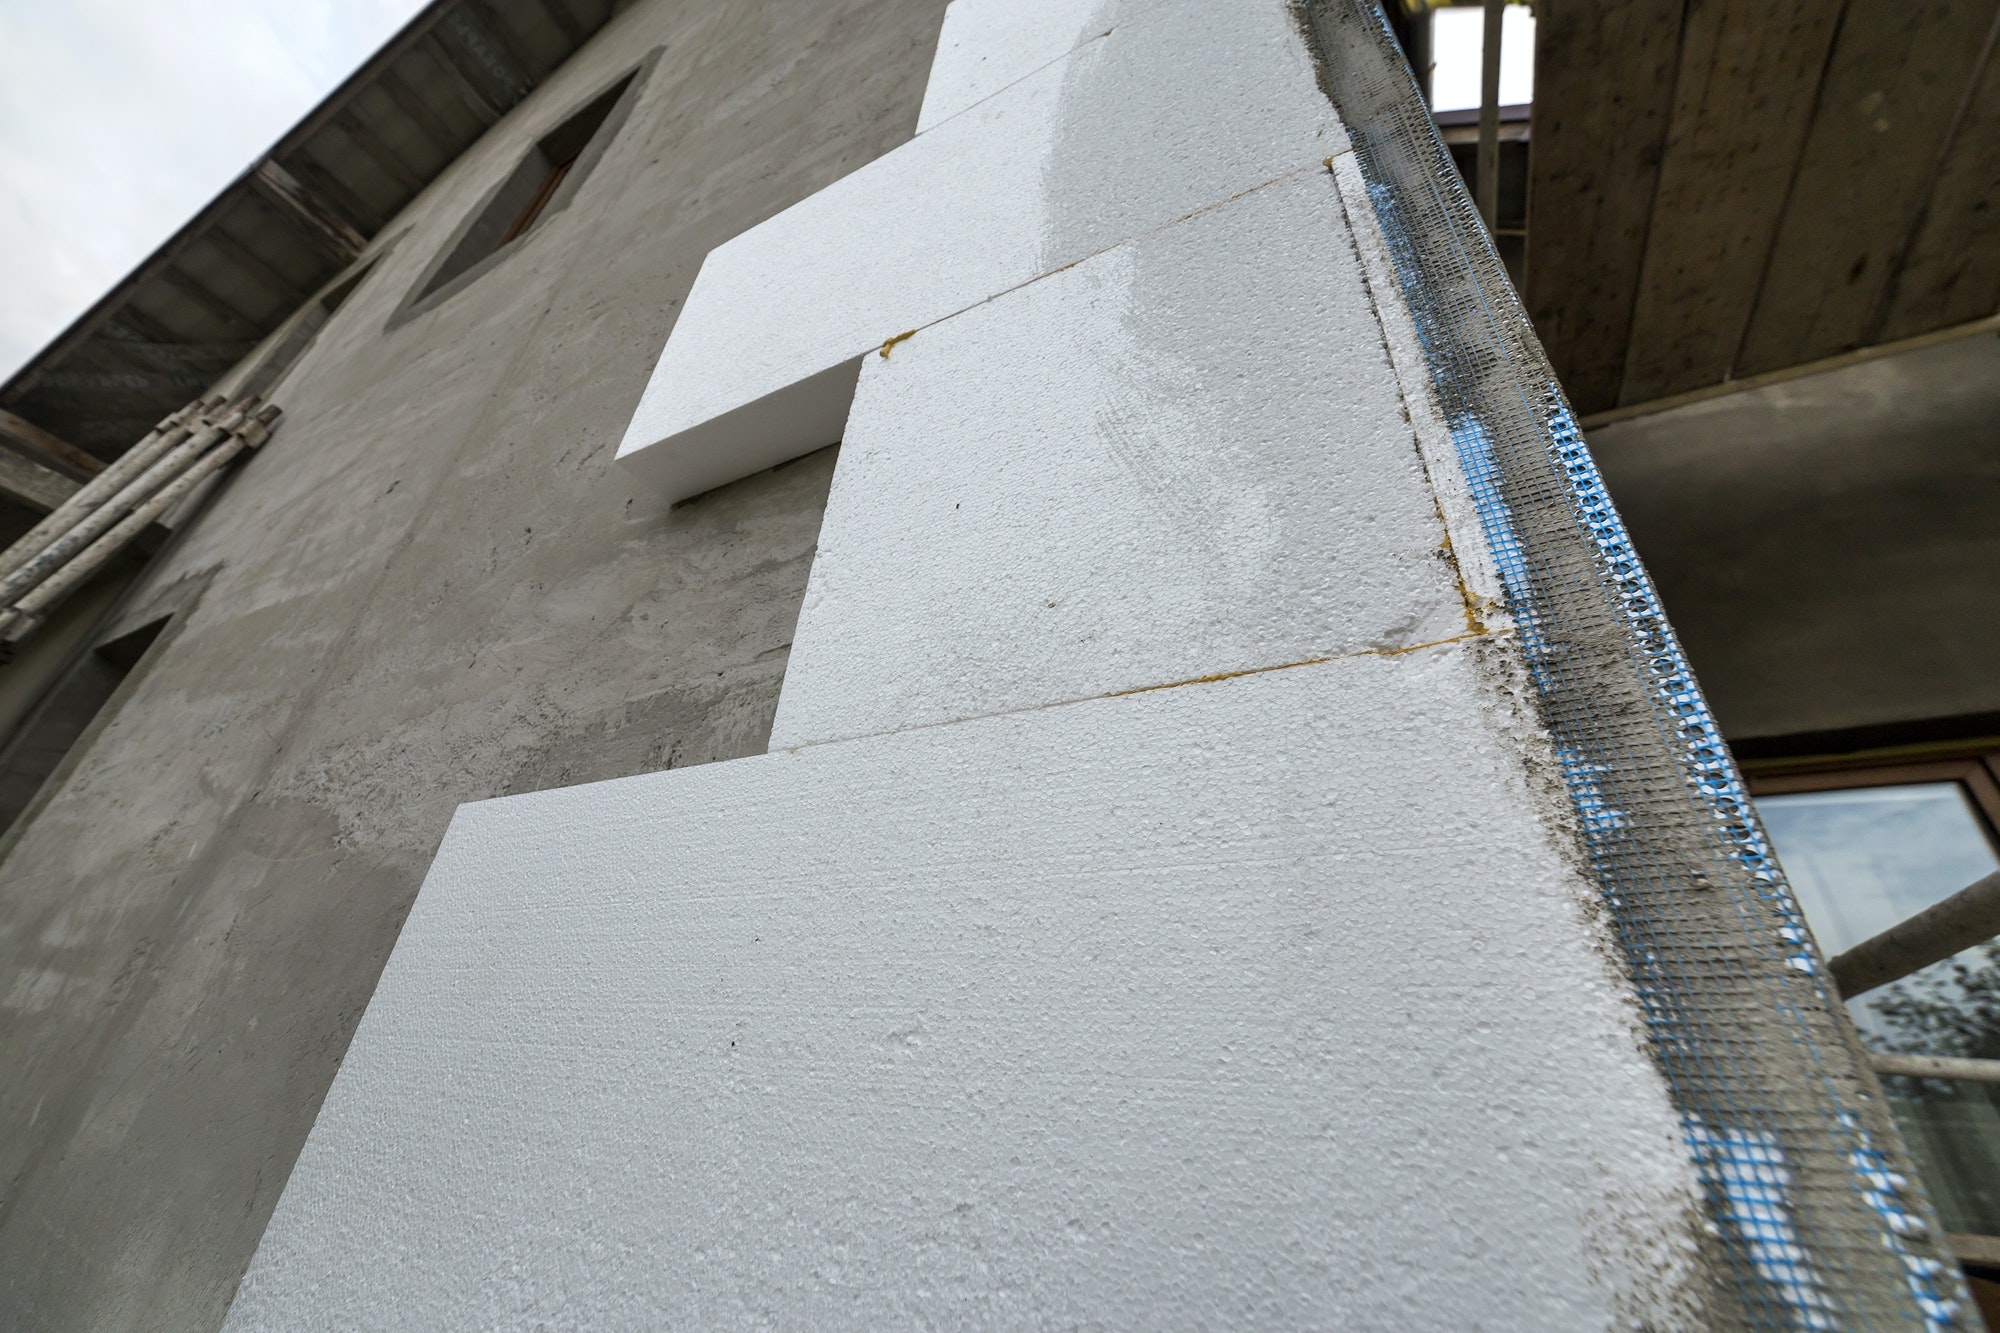 Close-up detail of plastered house wall with rigid styrofoam insulation. Modern technology